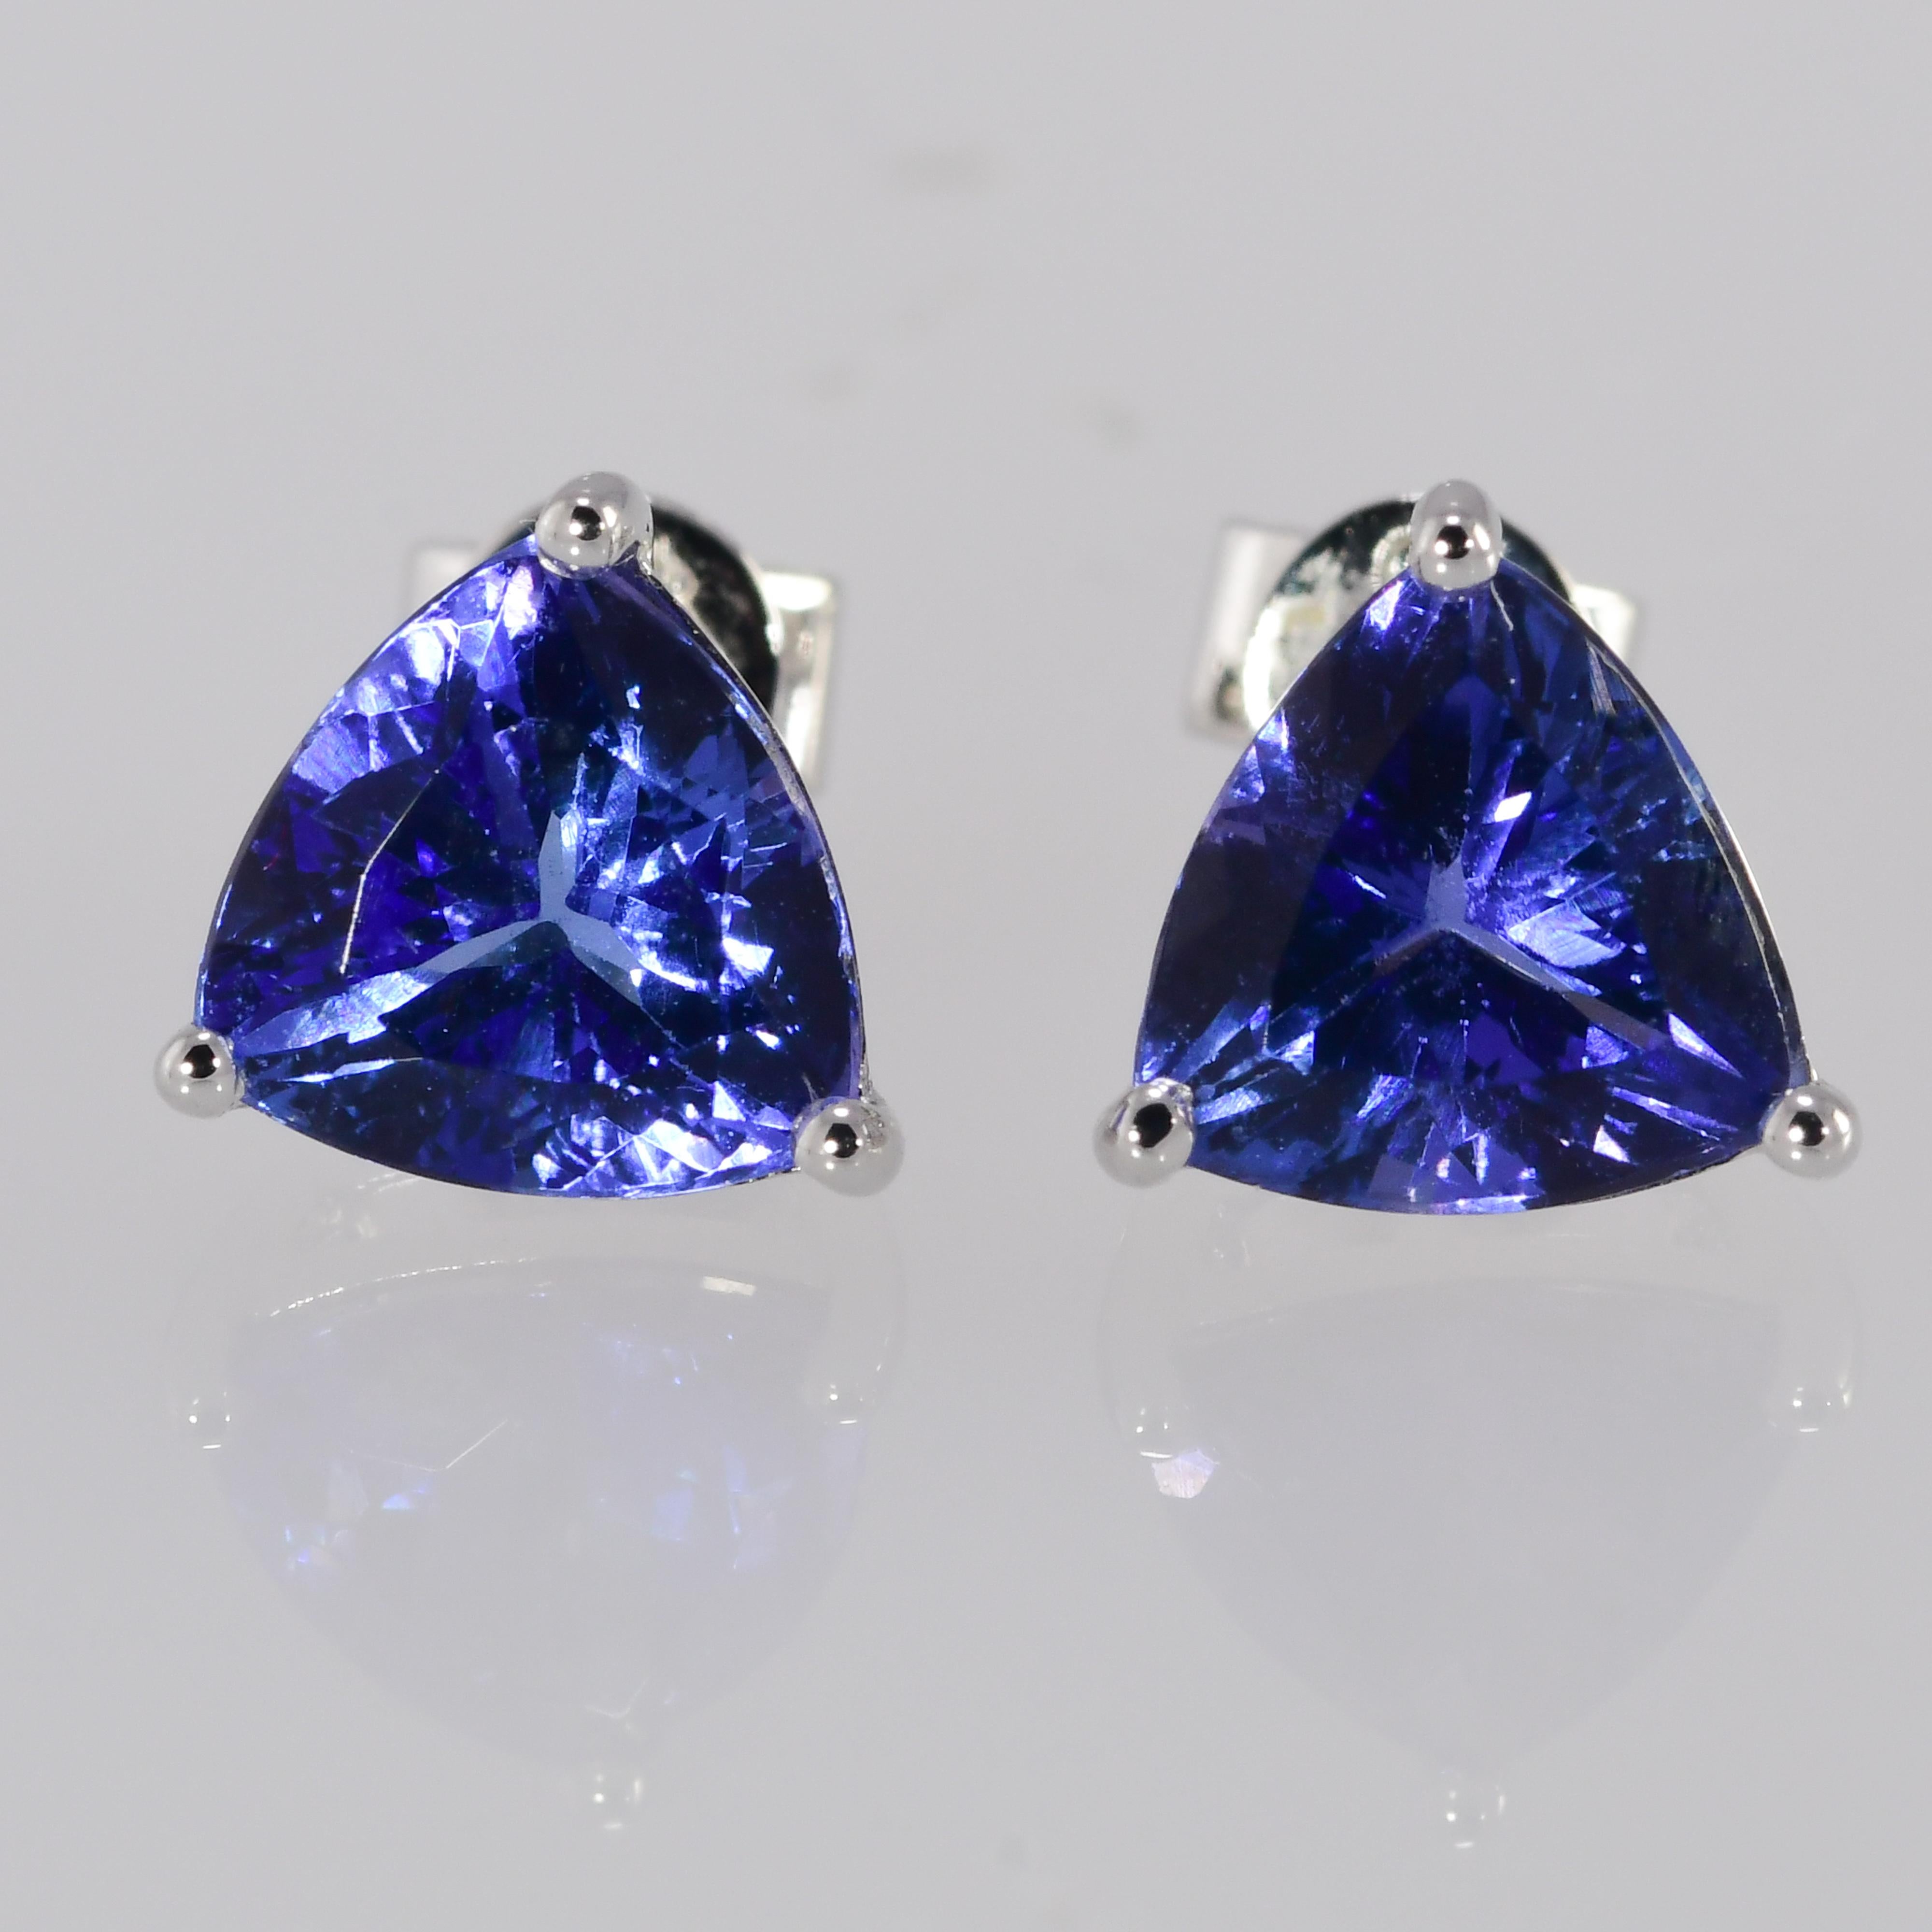 Brilliant deep slightly violetish blue perfectly match triangular brilliant natural tanzanite solitaire earrings. 2.6 carat total gem weight. 
The tanzanite are set in a three prong basket with posts and high quality earring backs. The 14 karat